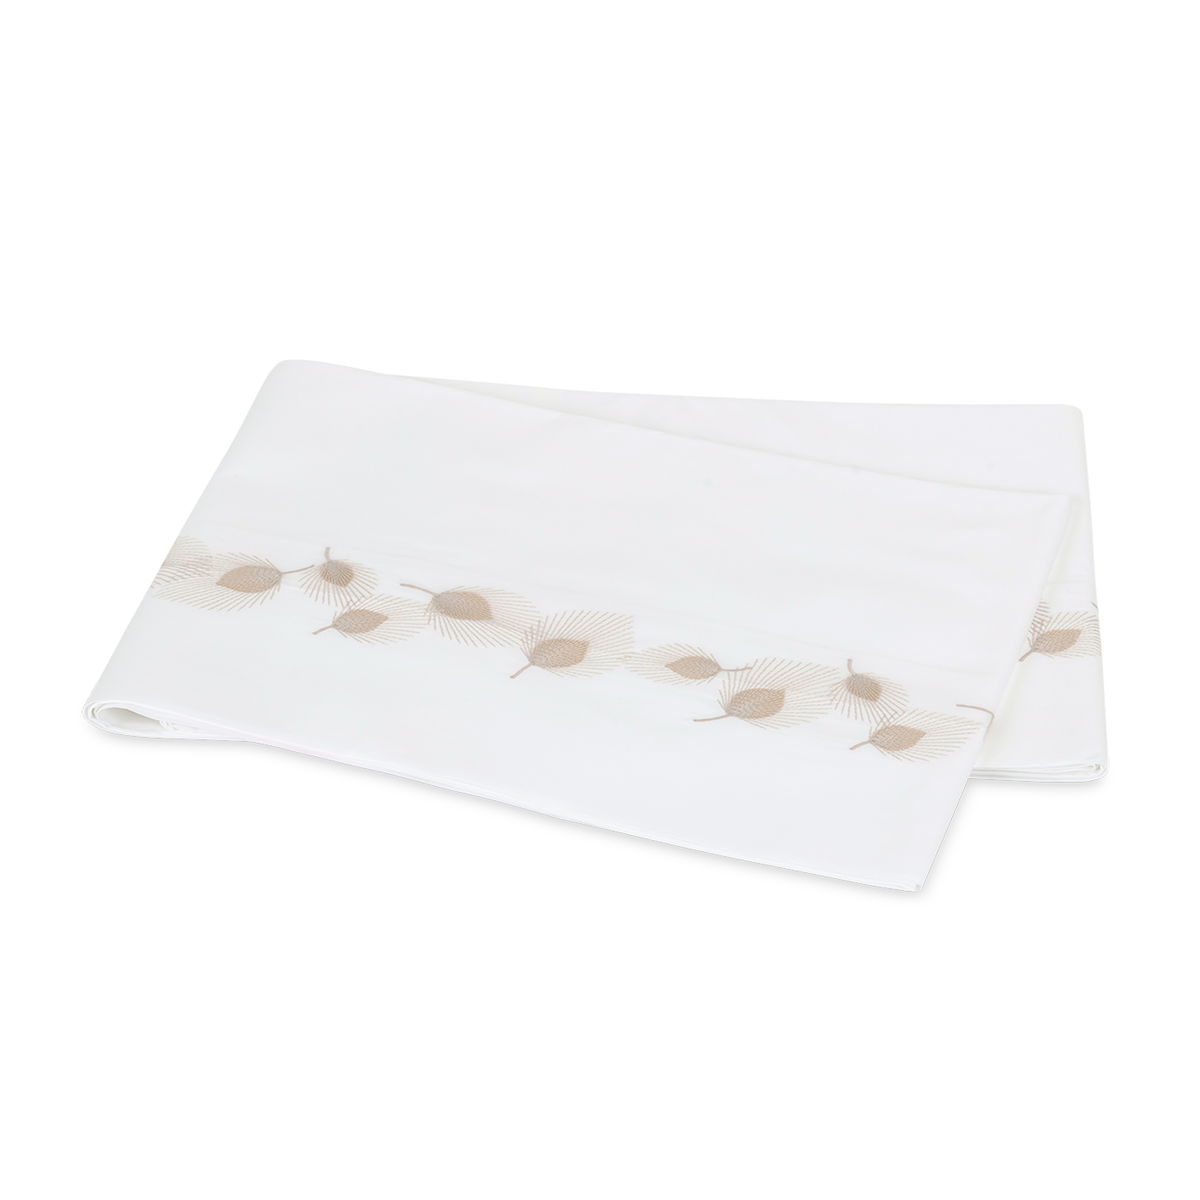 Flat Sheet of Matouk Feather Bedding in Champagne Color